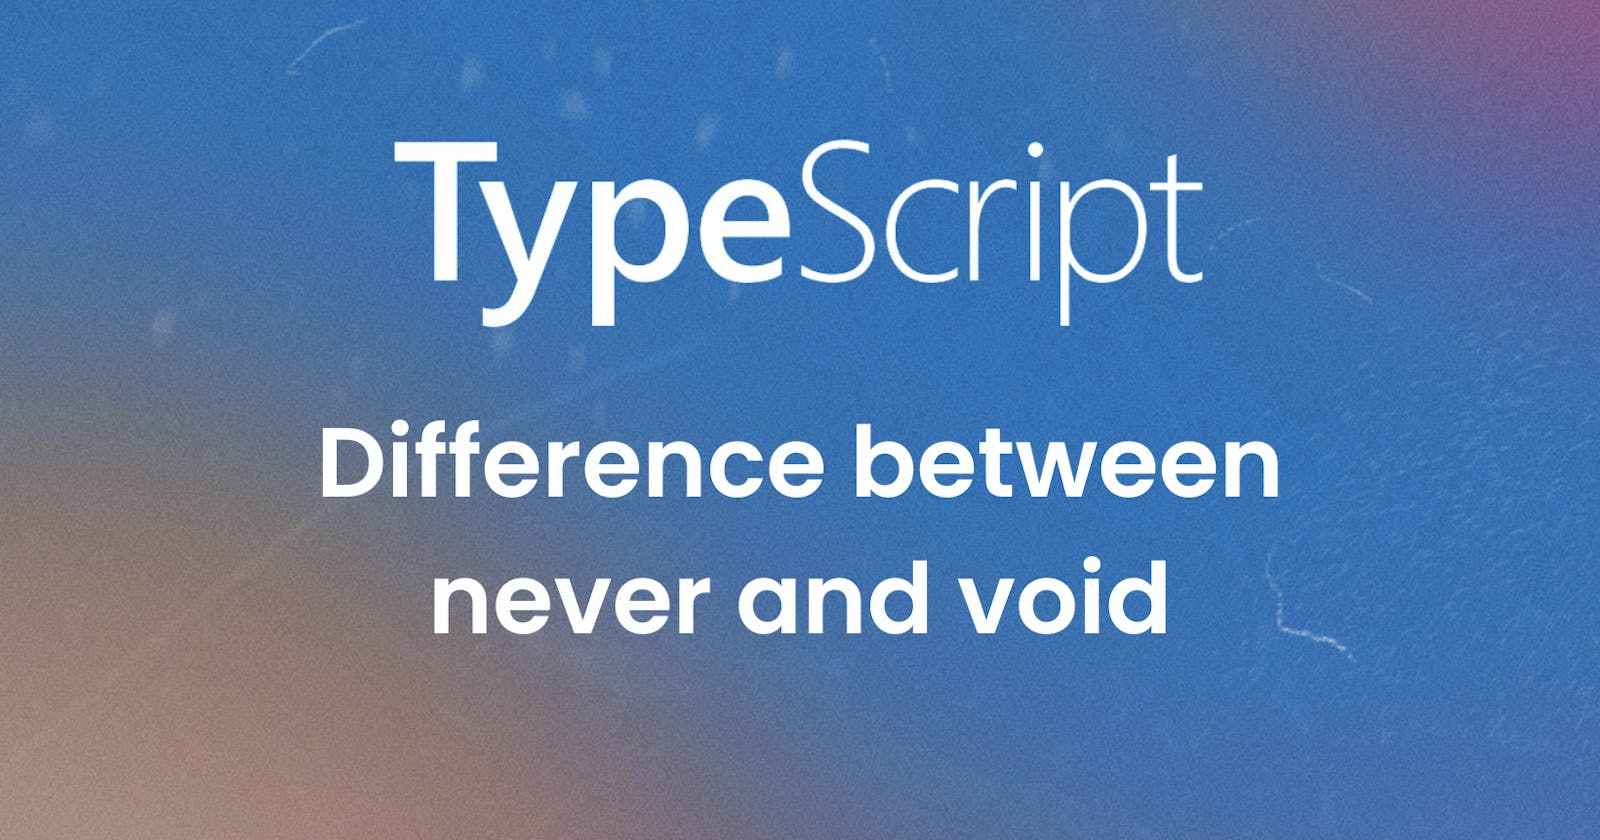 What’s the difference between never and void in TypeScript?